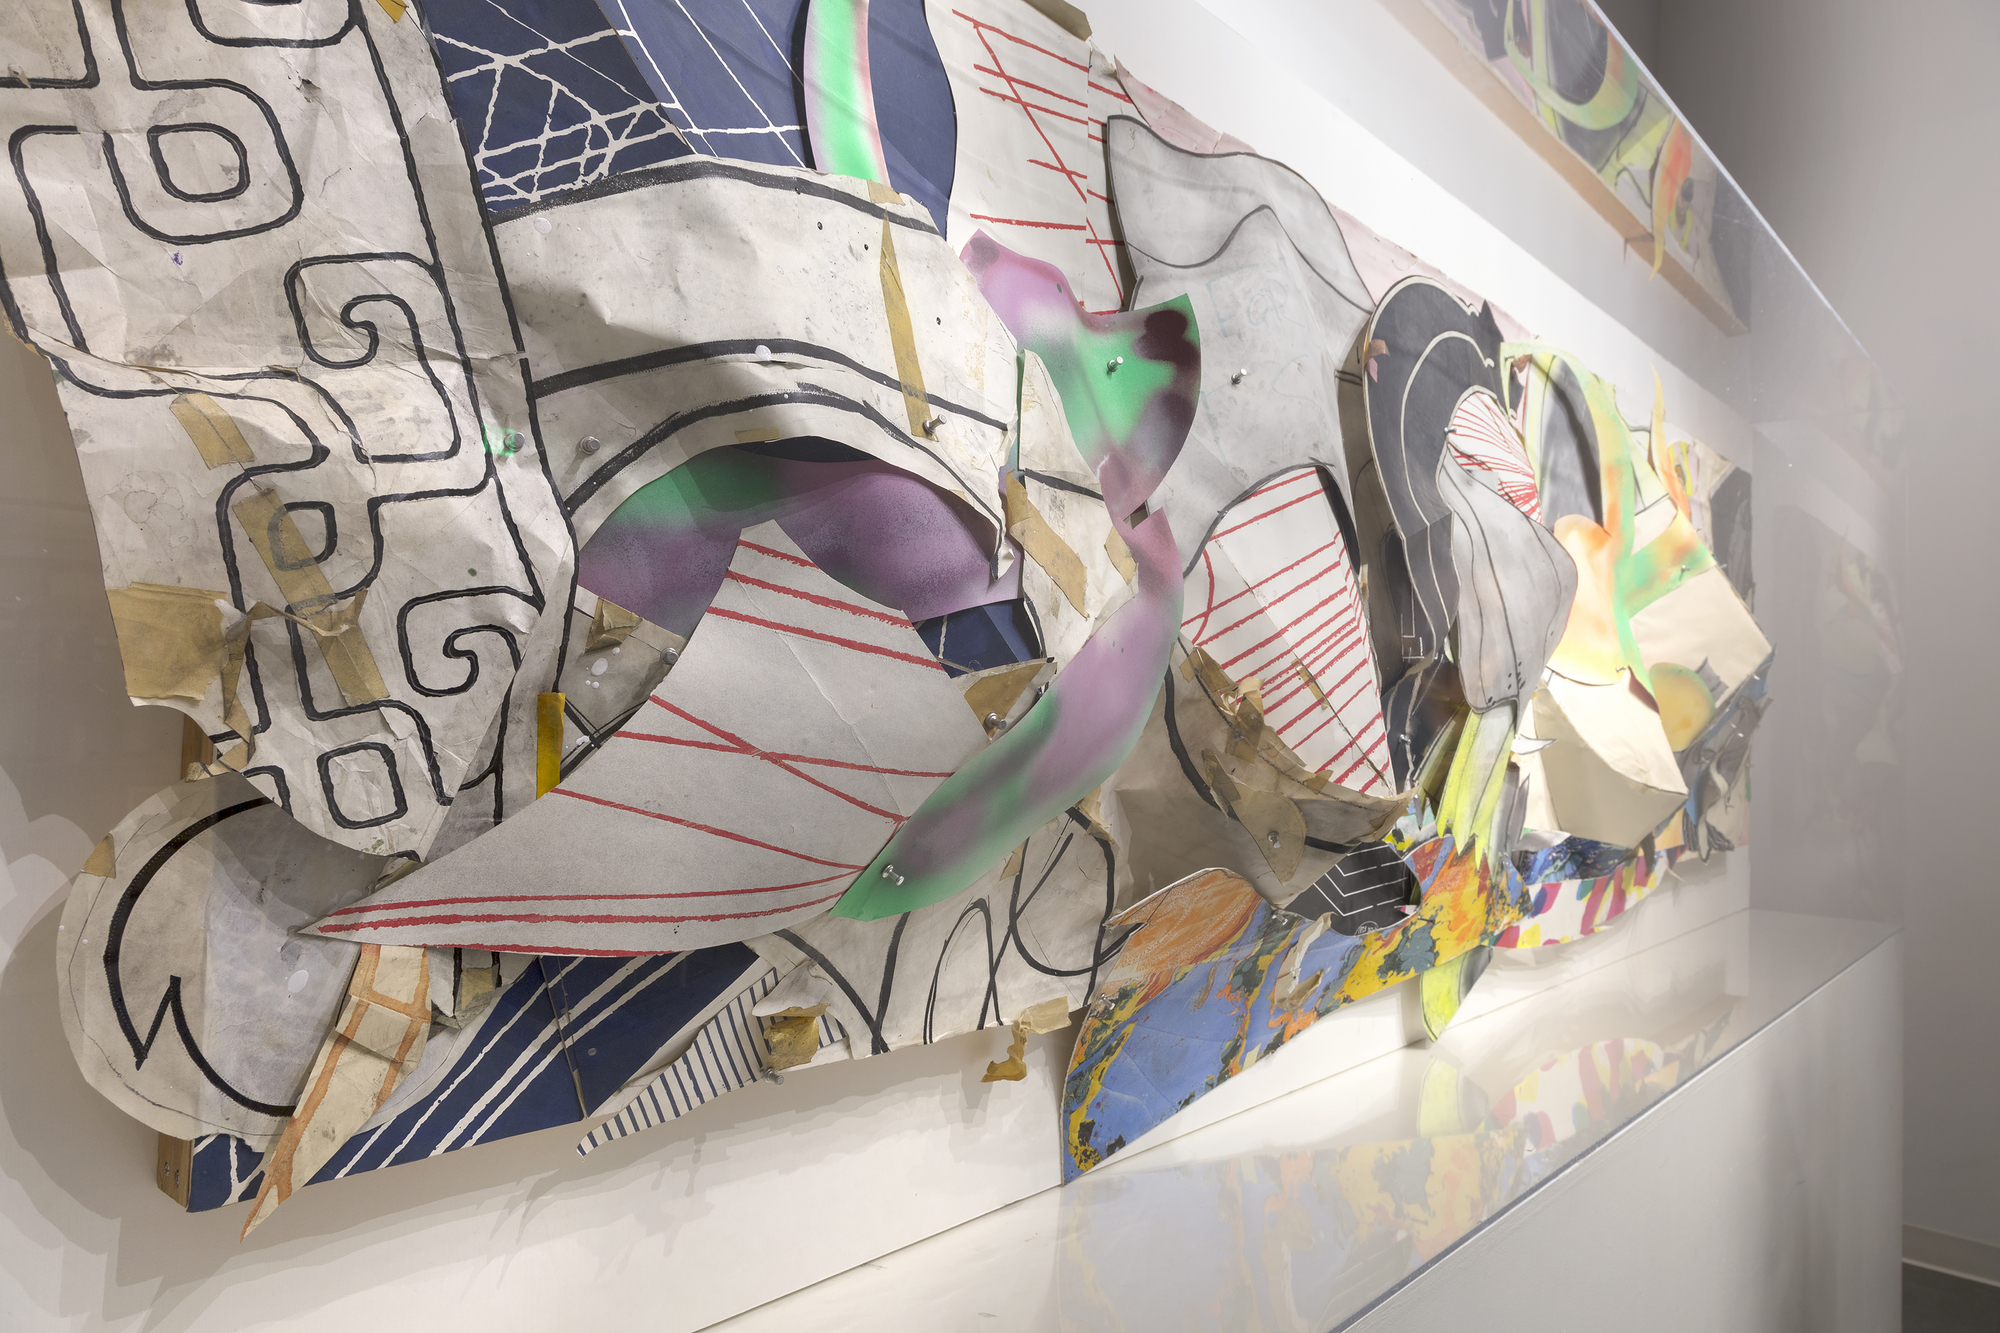 FRANK STELLA - Untitled - three dimensional mixed media on board, mounted on wood - 43 x 128 x 12 in.